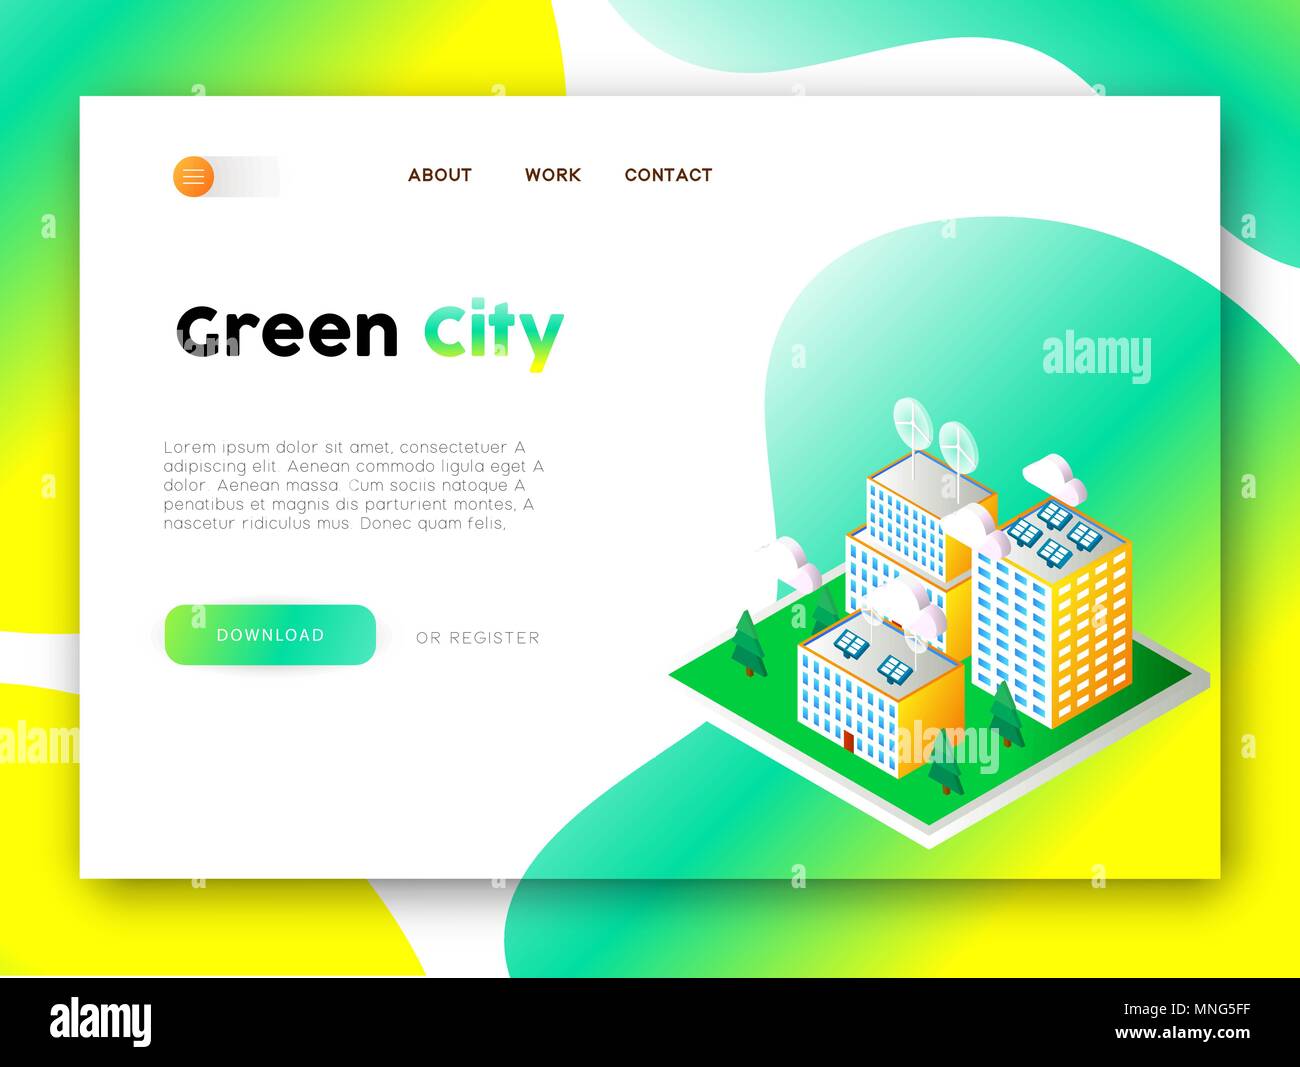 Green city web app landing page. Internet site template for eco friendly community with isometric illustration. EPS10 vector. Stock Vector